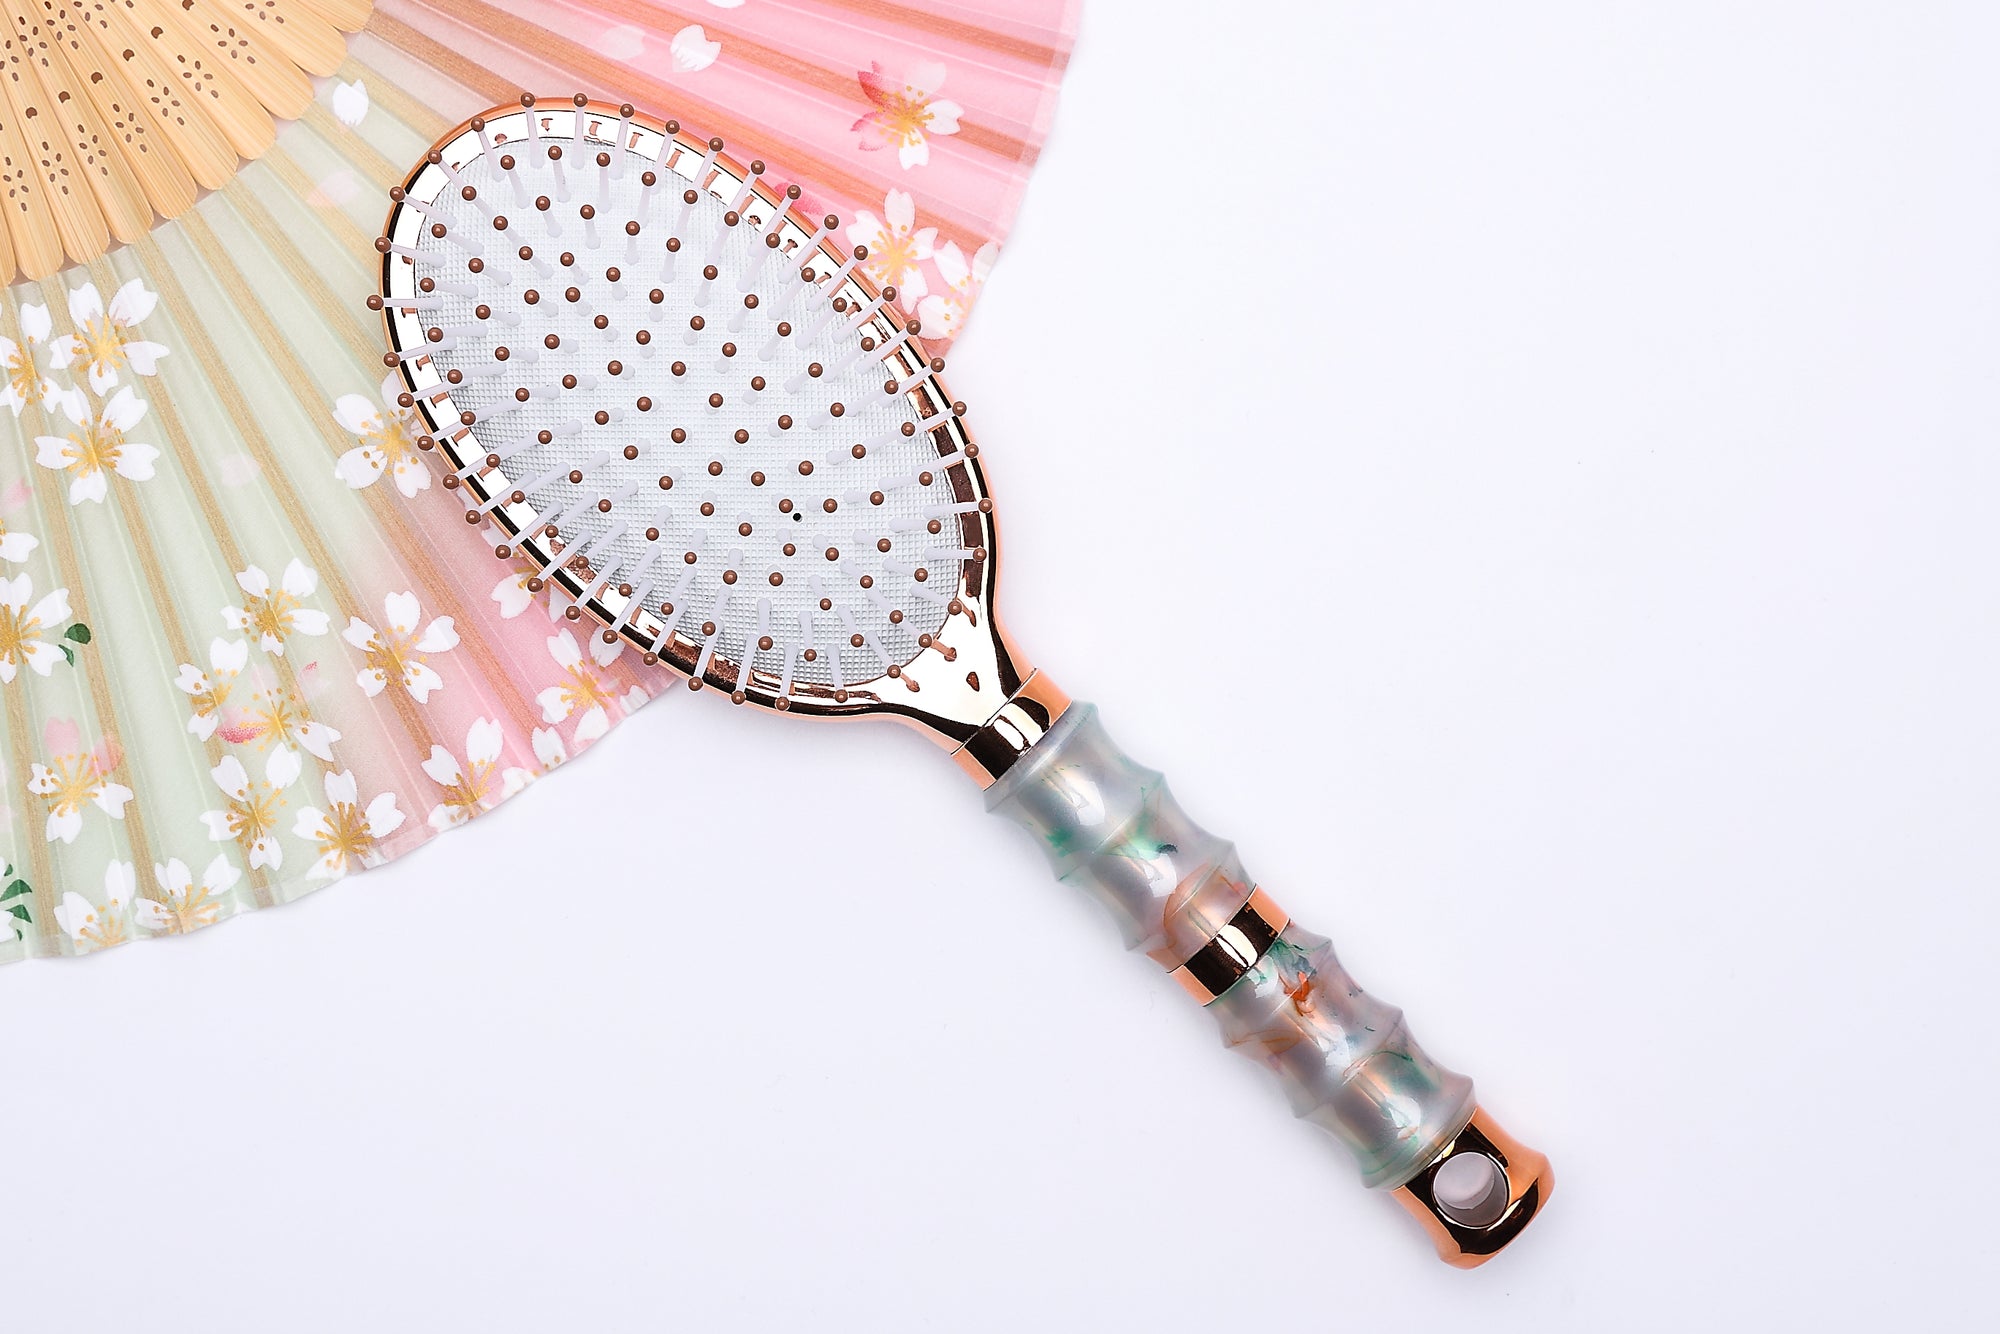 Large Oval Paddle Brush | Air Cushion Pad | Nylon Bristles with Epoxy Tips | Electroplated Bamboo Handle